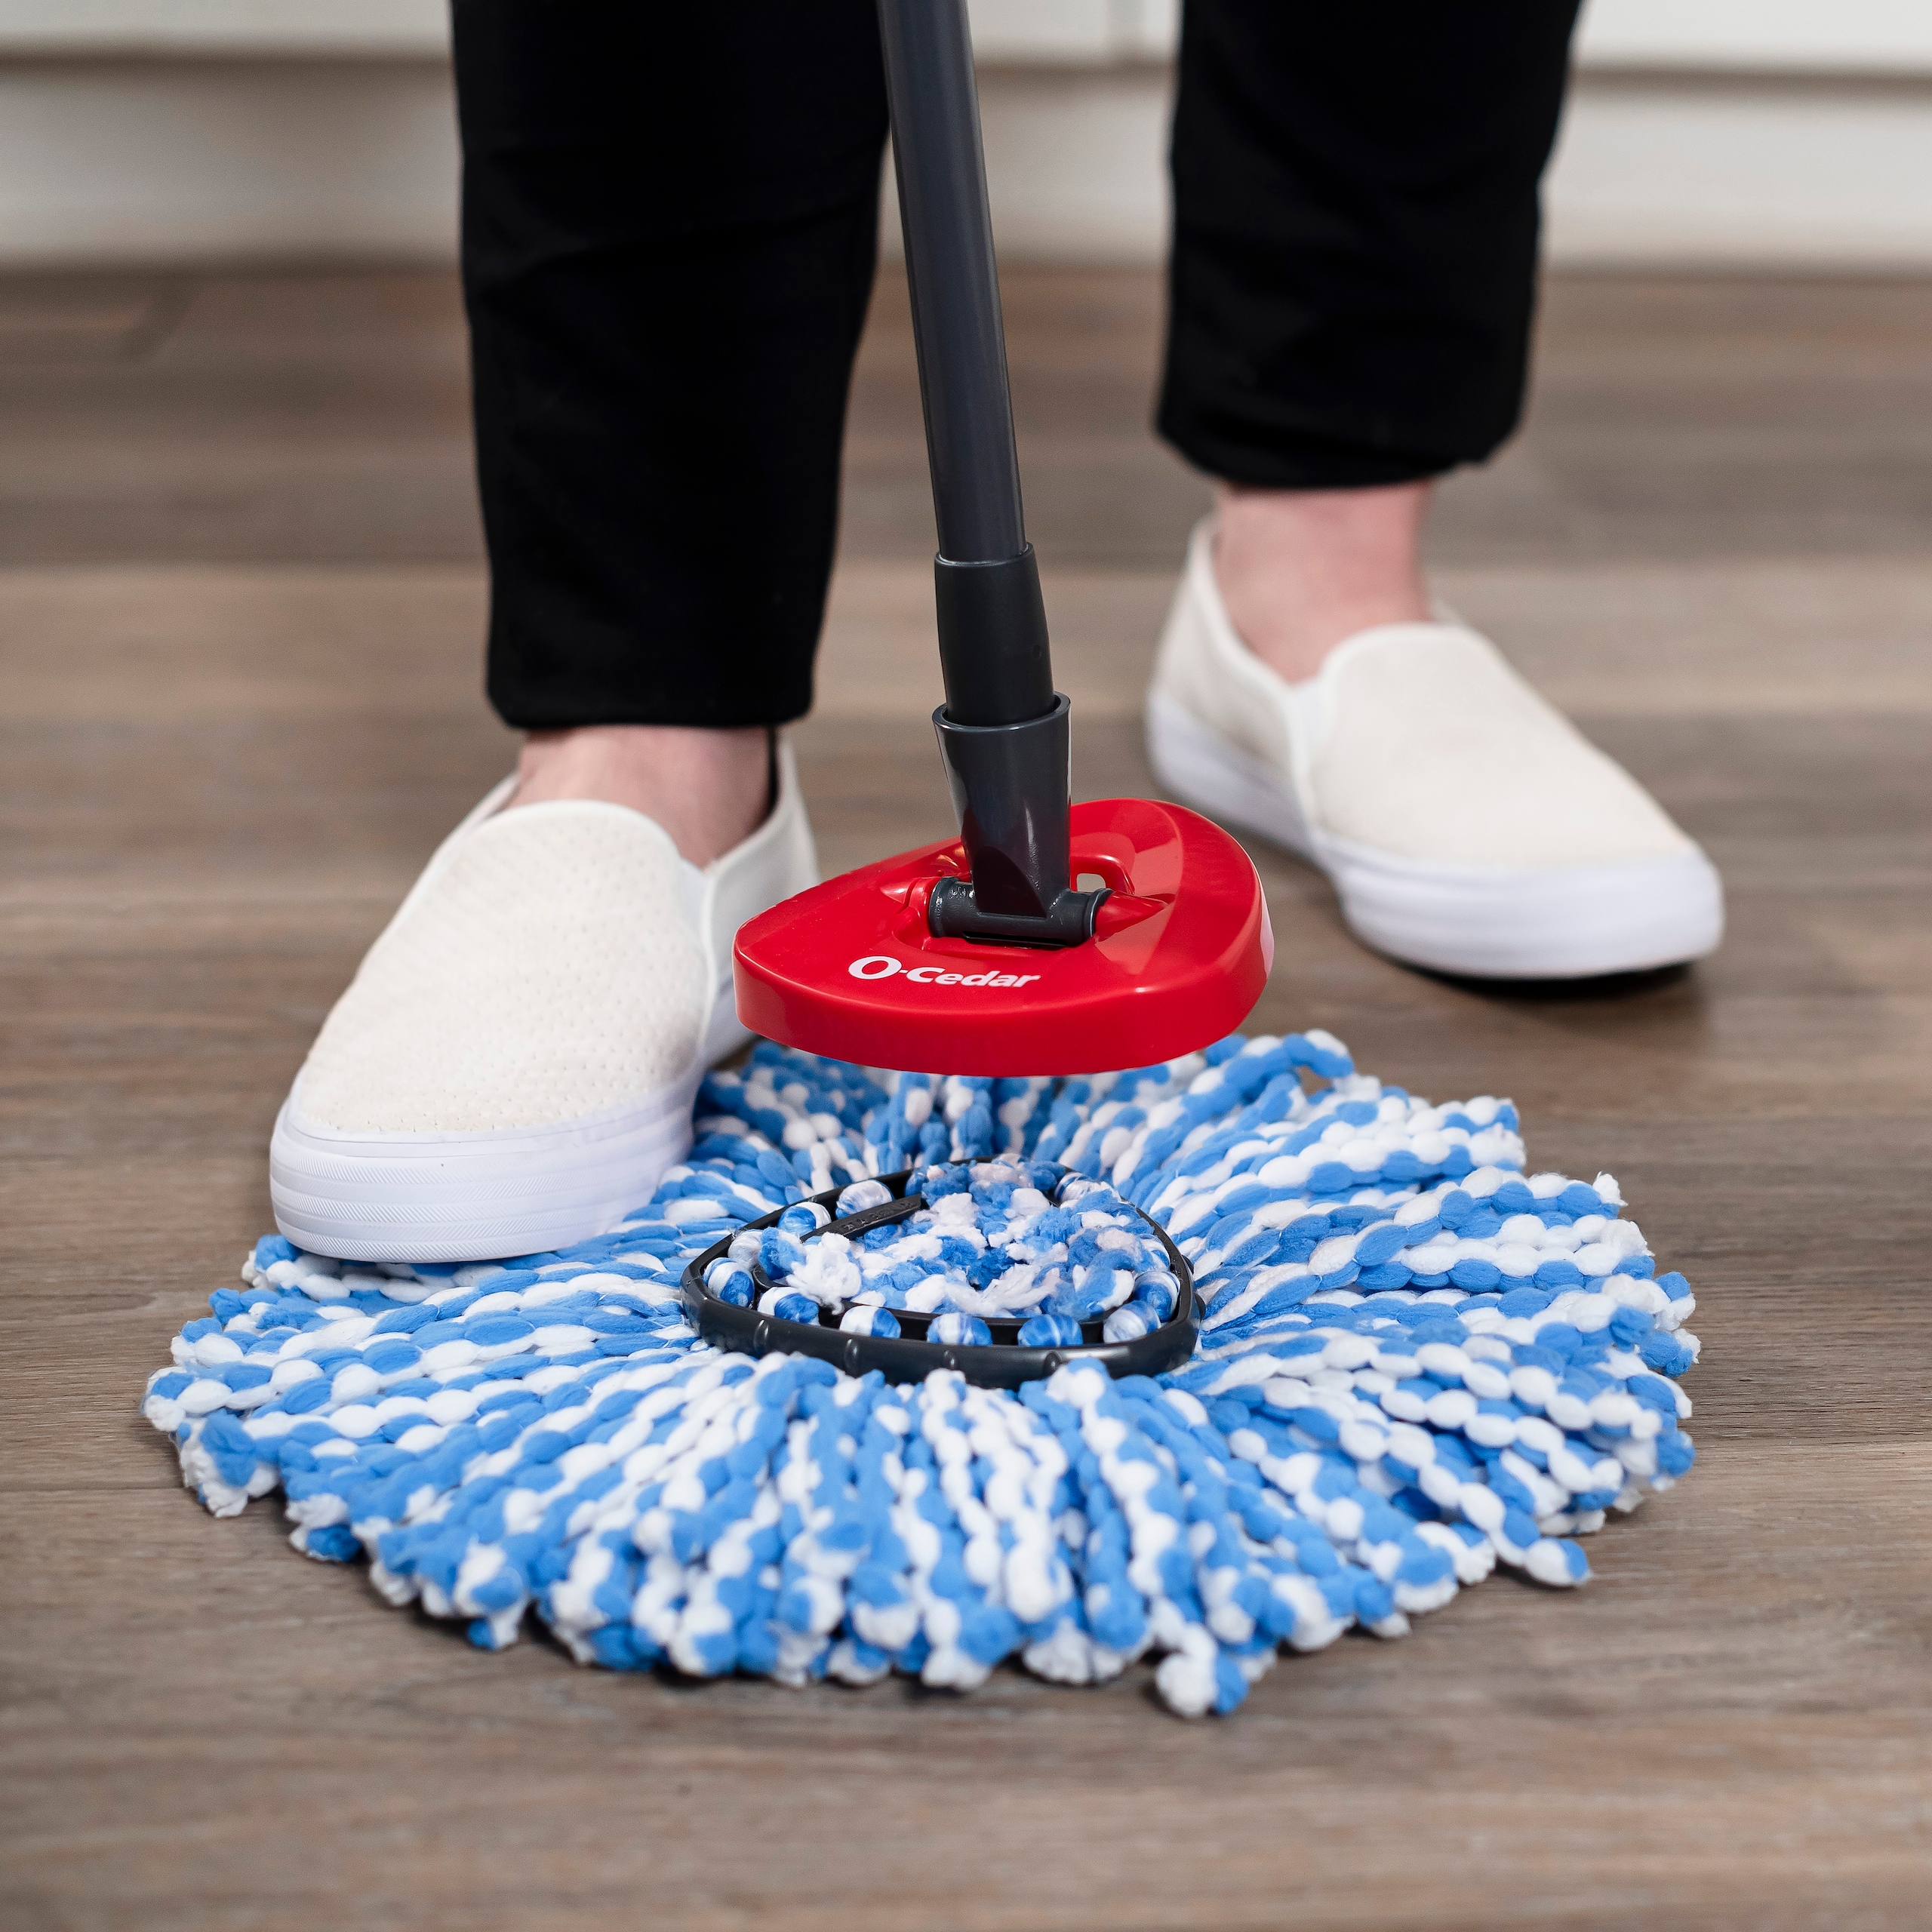 4 RinseClean Spin Mop Benefits and How to Use It for a Superior Clean, Household Cleaning Products Made for Easy Cleaning